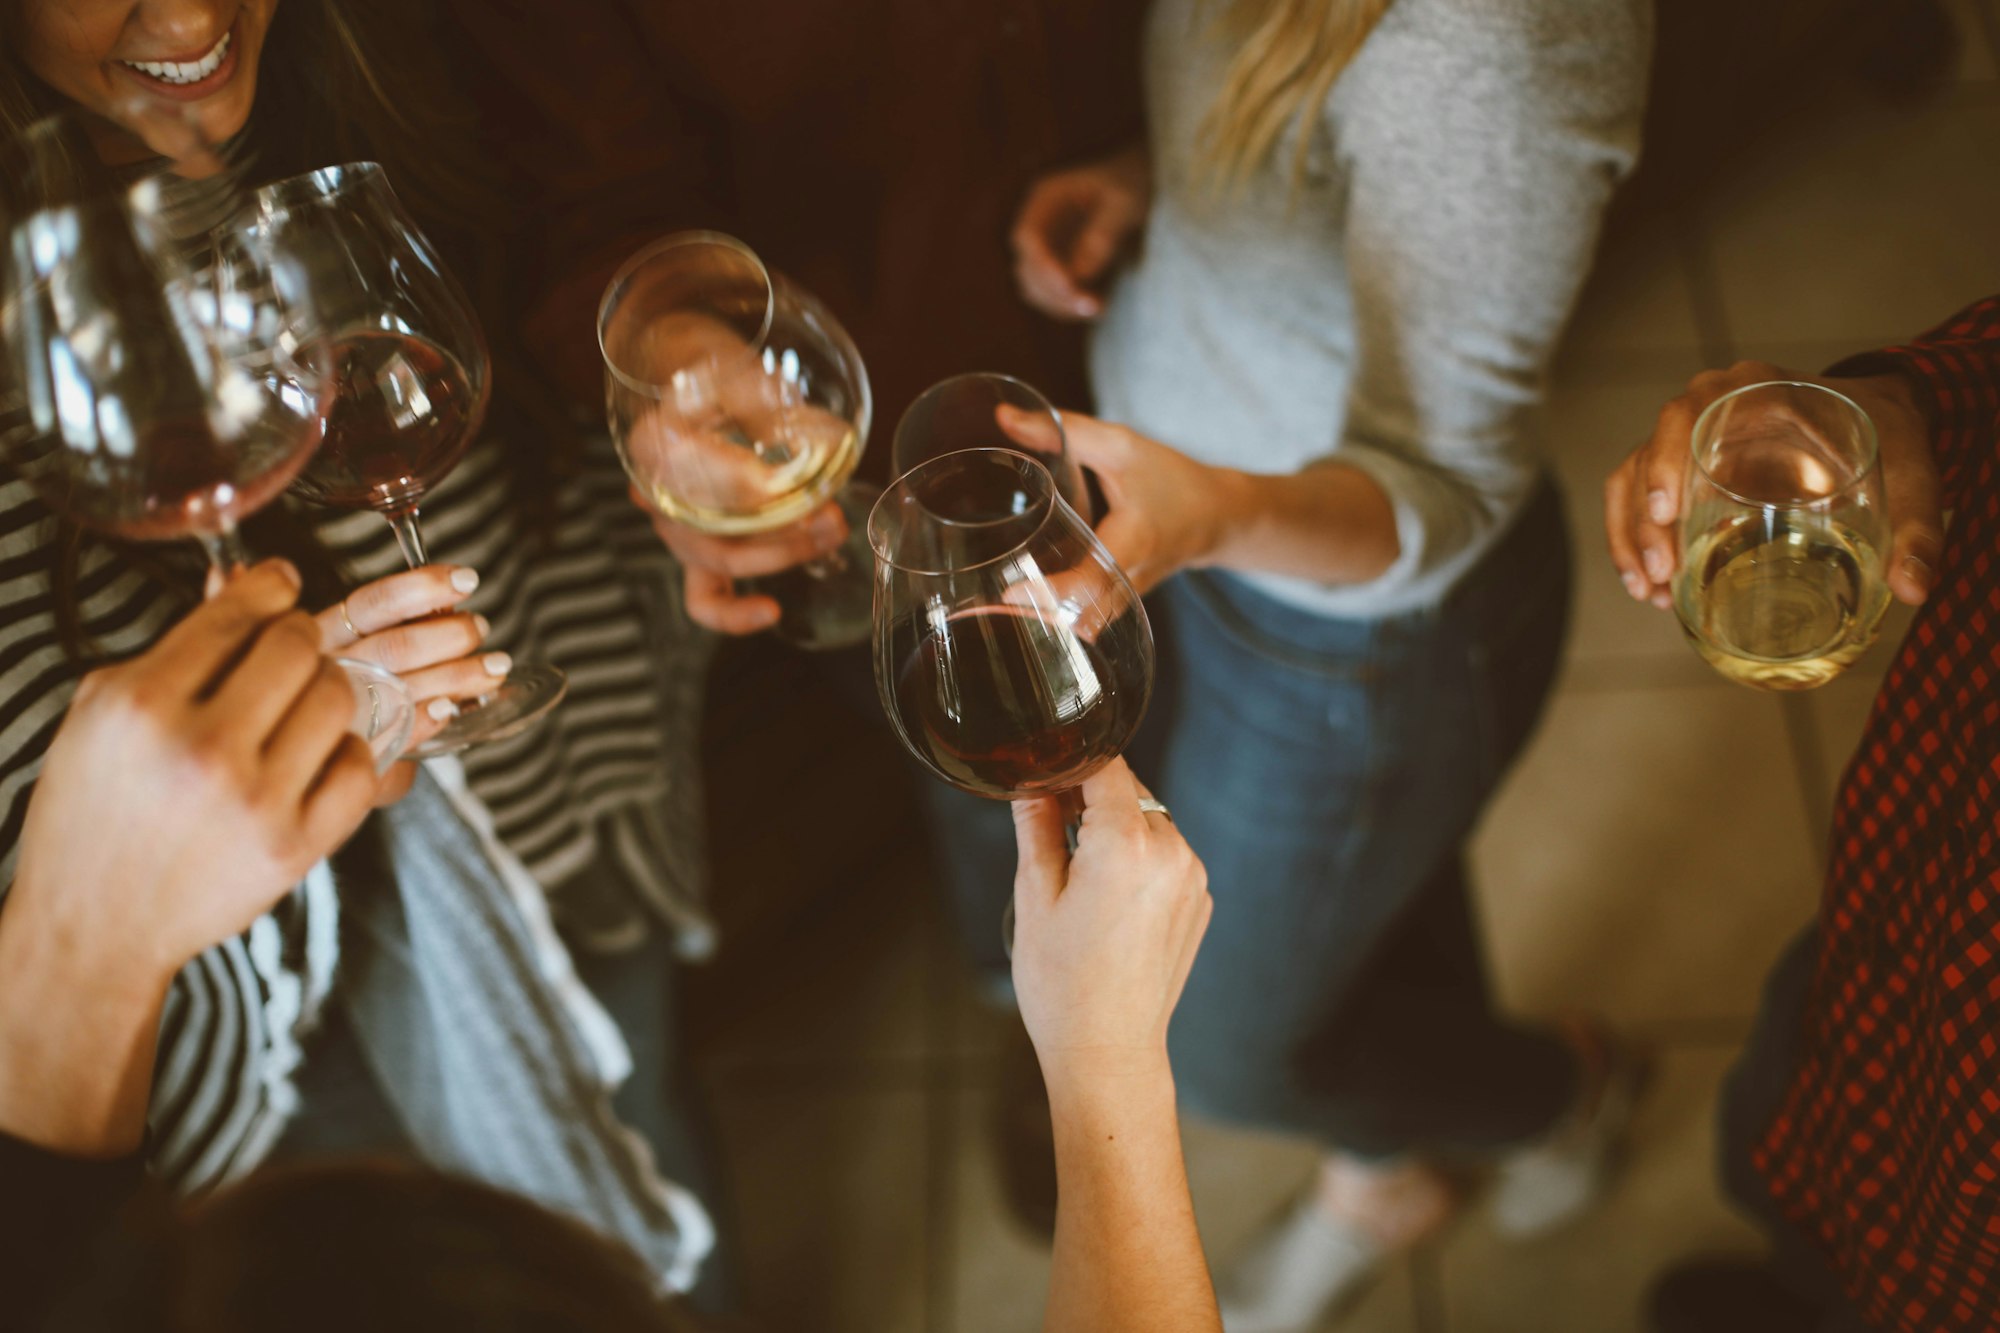 A group of people enjoying wine together